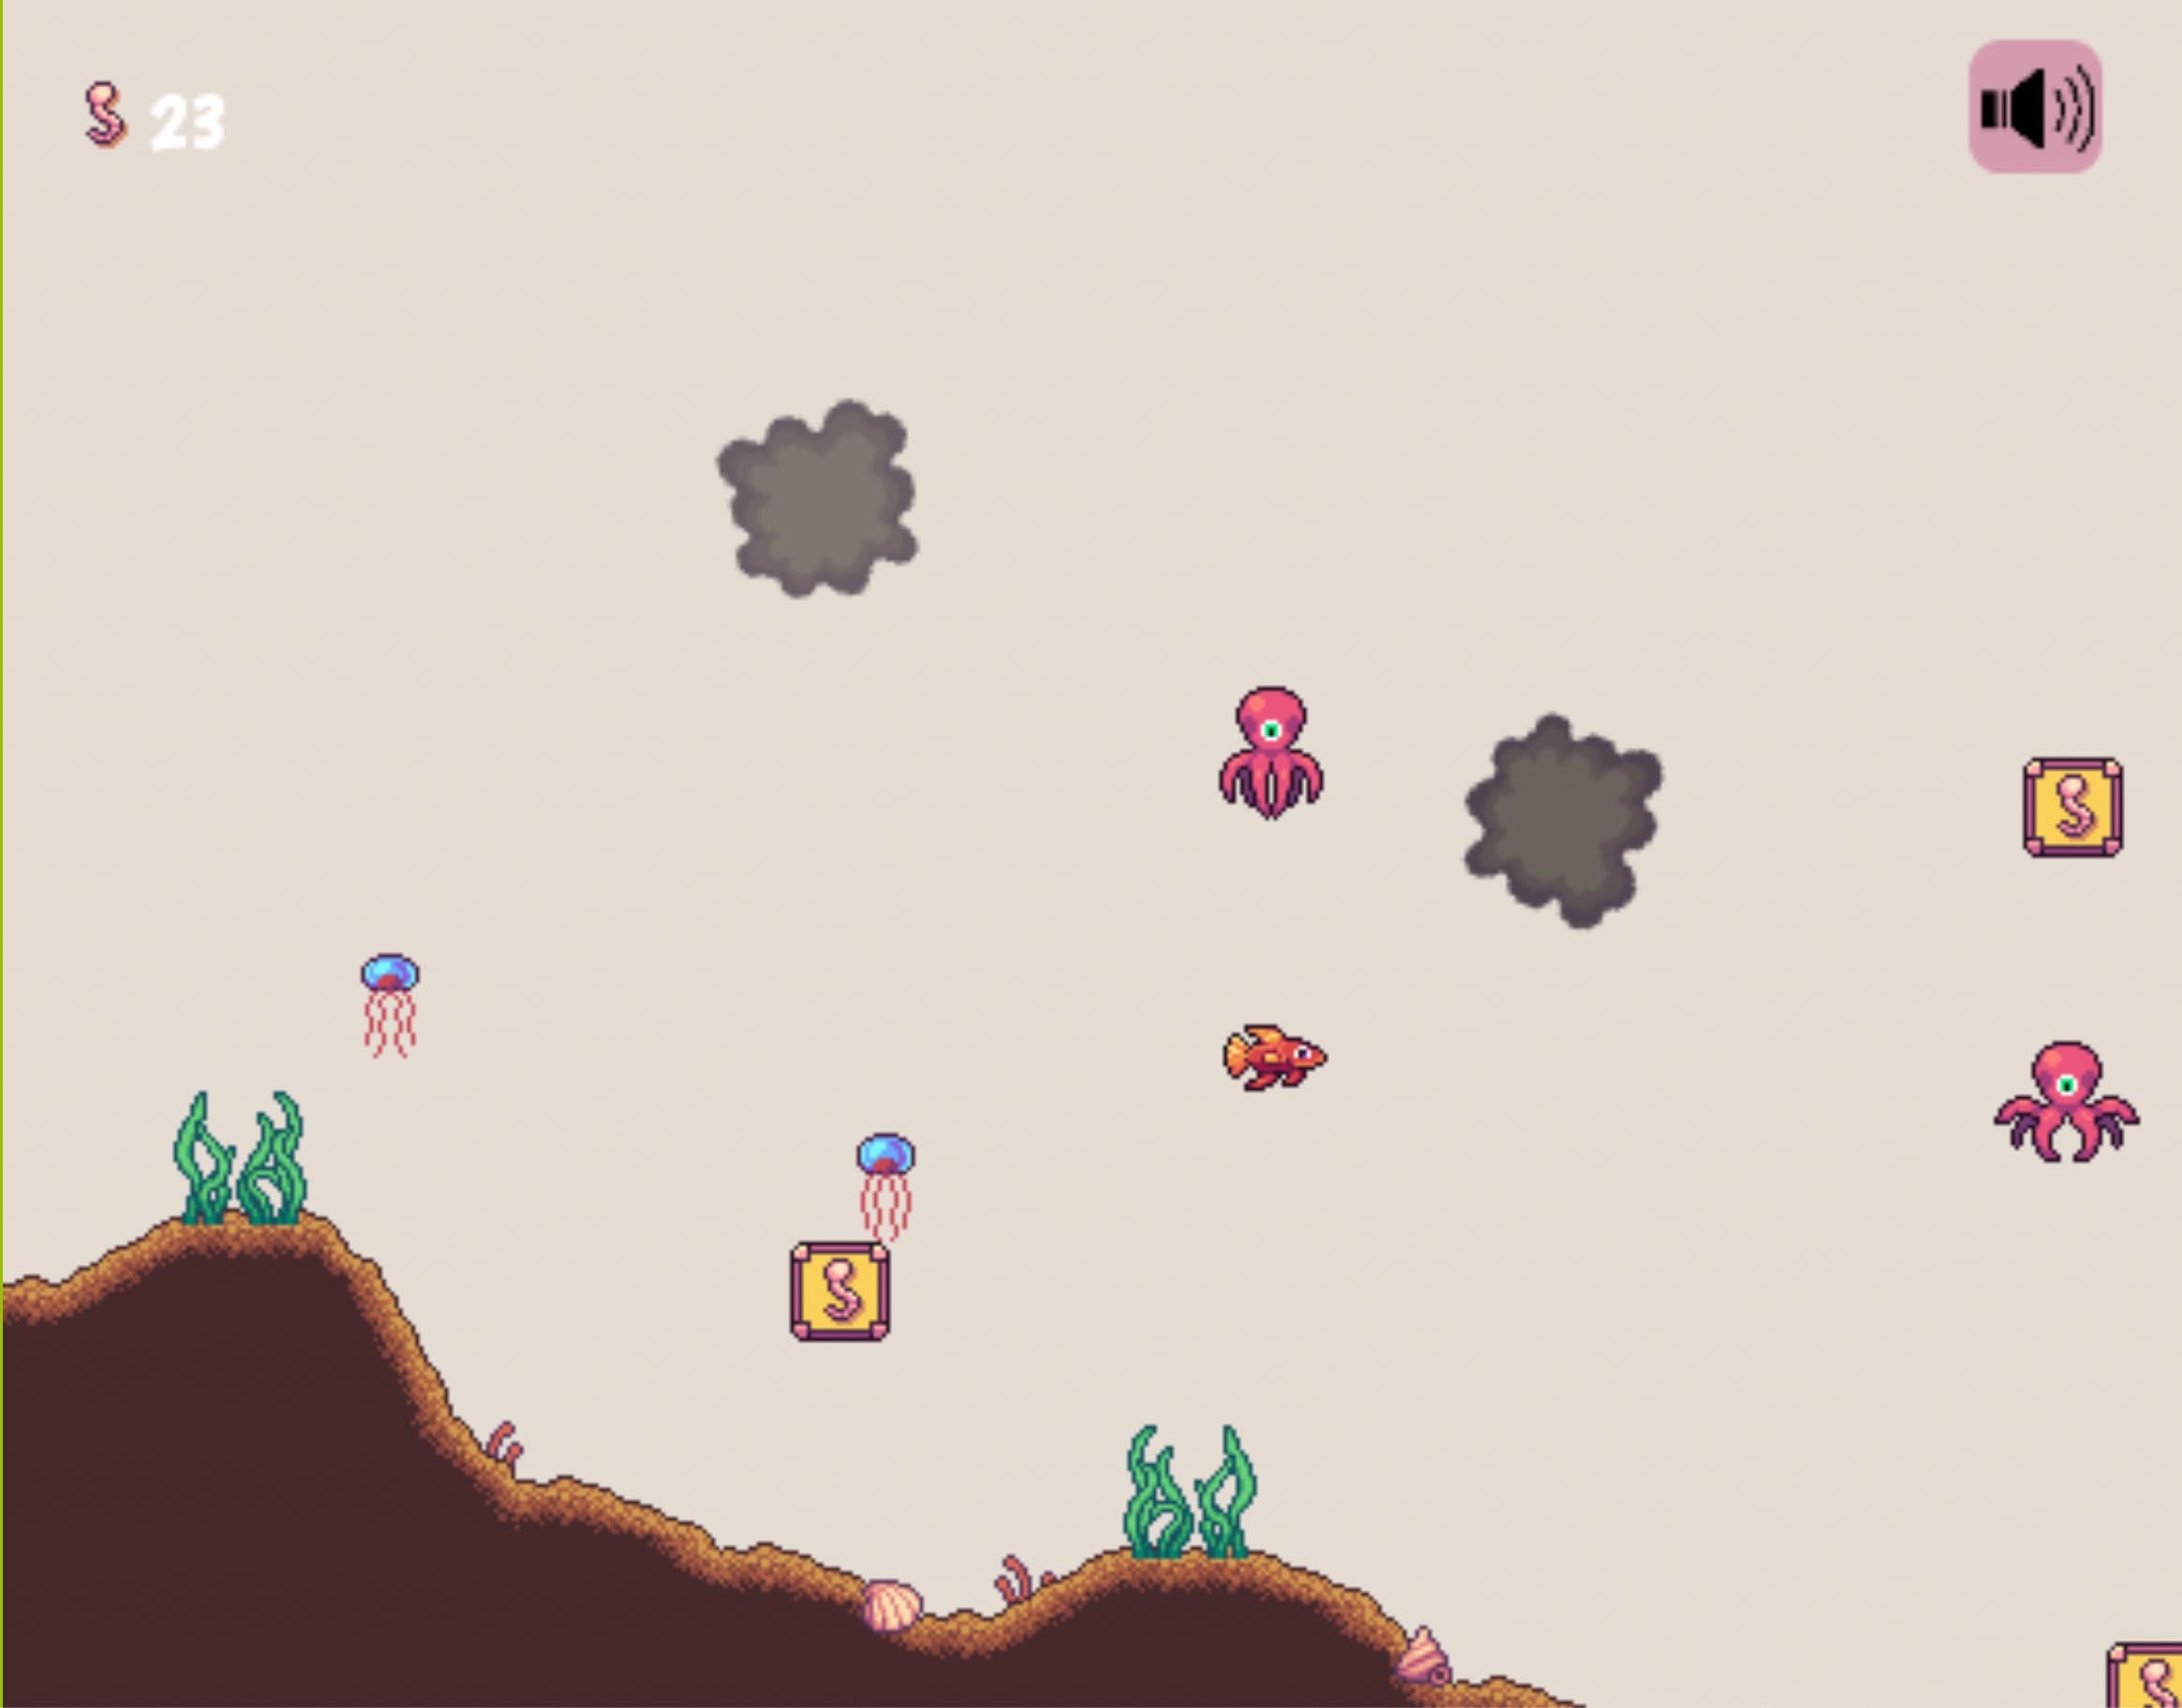 This is a screenshot from Genre Piranha. The player is being hunted by an octopus who is shooting ink clouds.